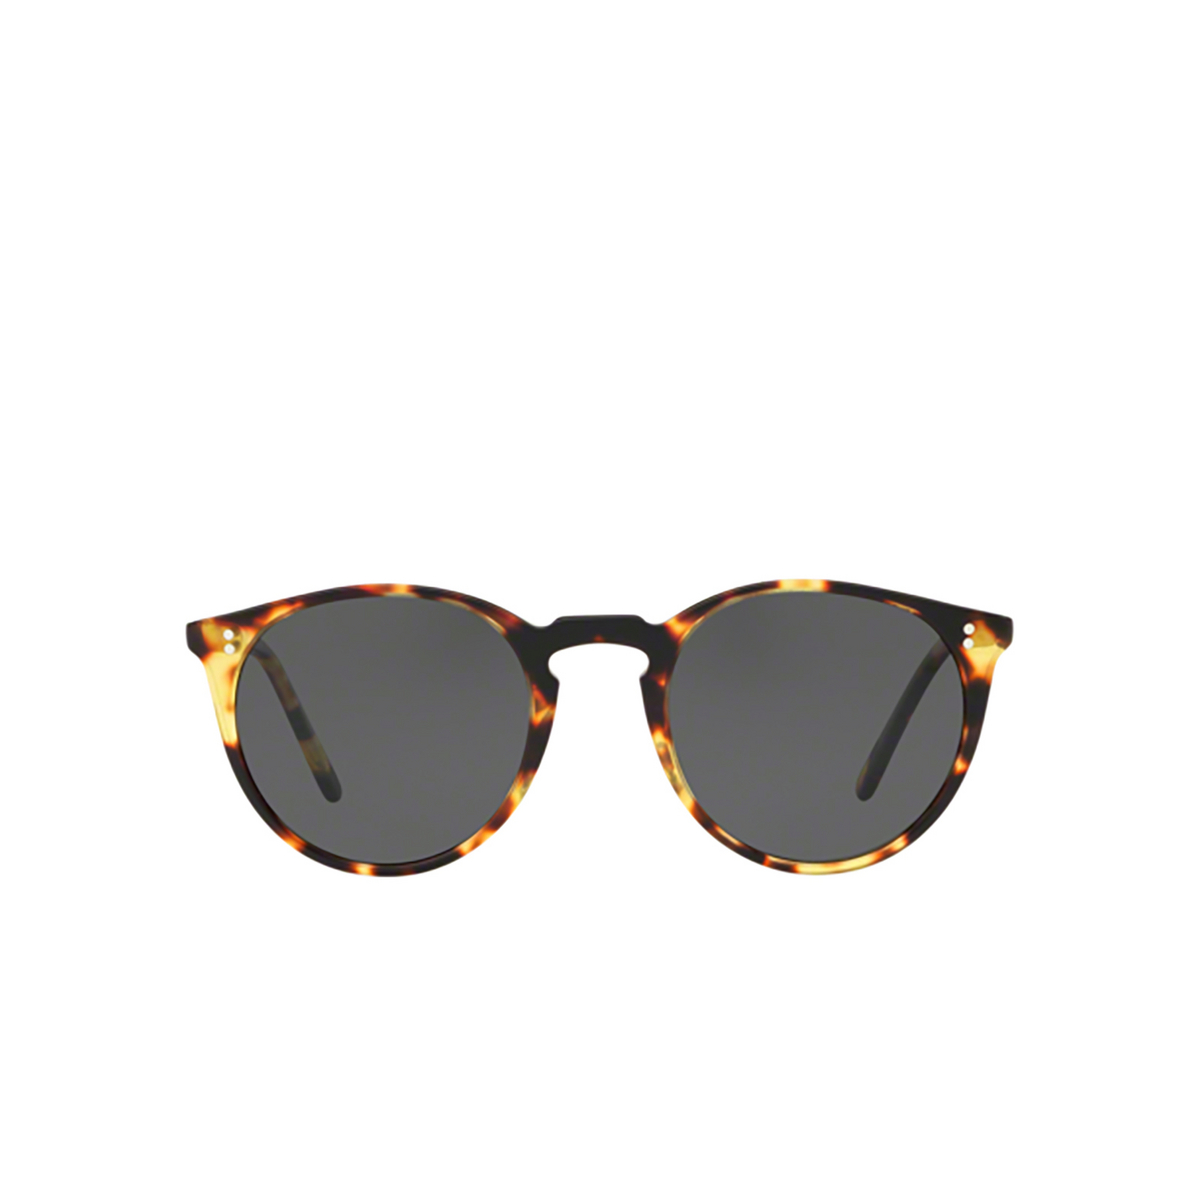 Occhiali da sole Oliver Peoples O'MALLEY 1407P2 Vintage Dtb - frontale